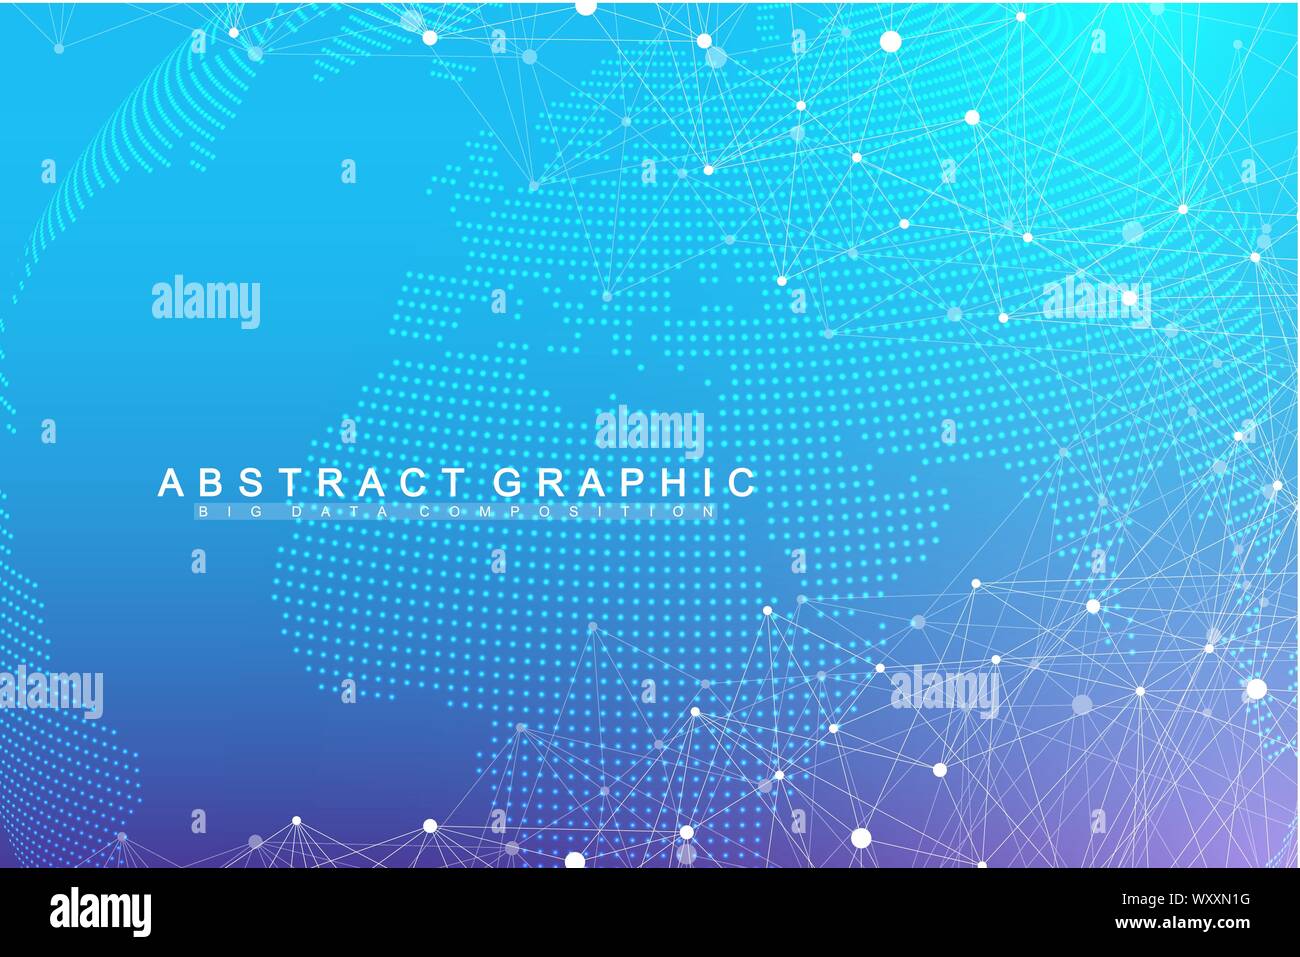 Big data visualization. Geometric abstract background visual information complexity. Futuristic infographics design. Technology background with Stock Vector